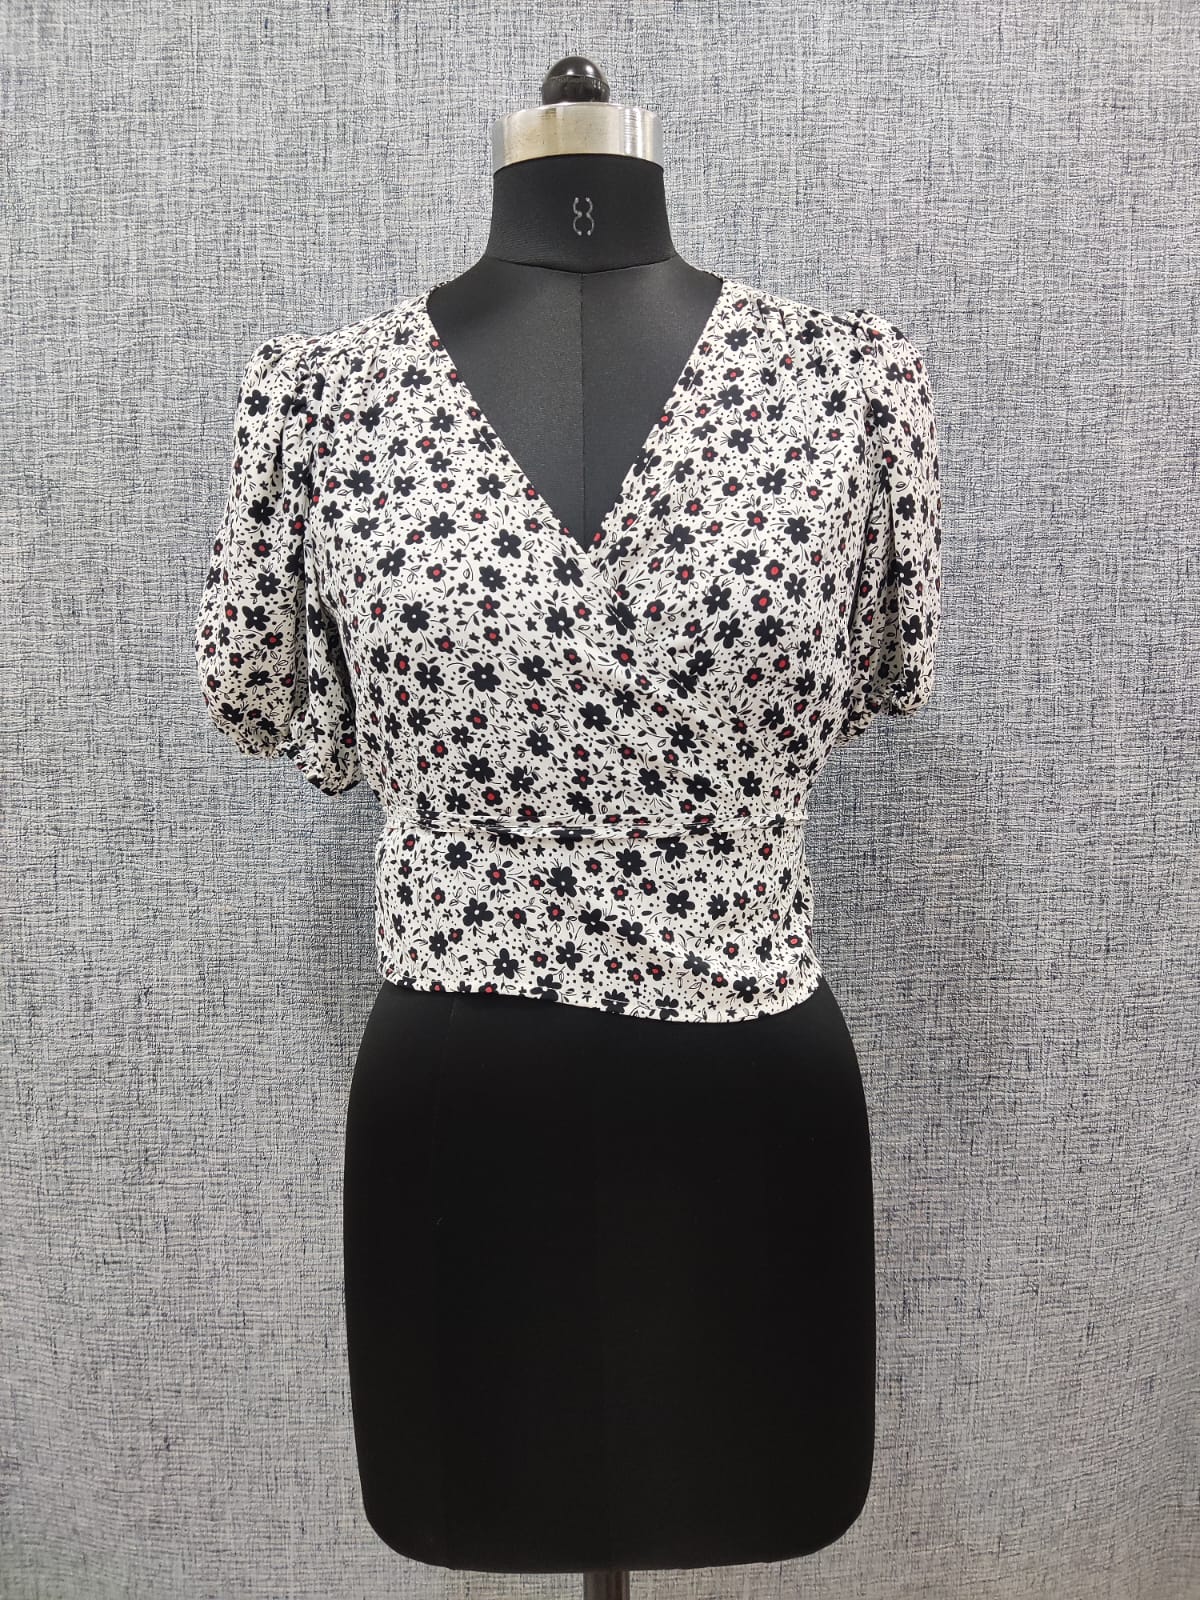 ZARA Black and White Floral Front Tie Crop Top | Relove